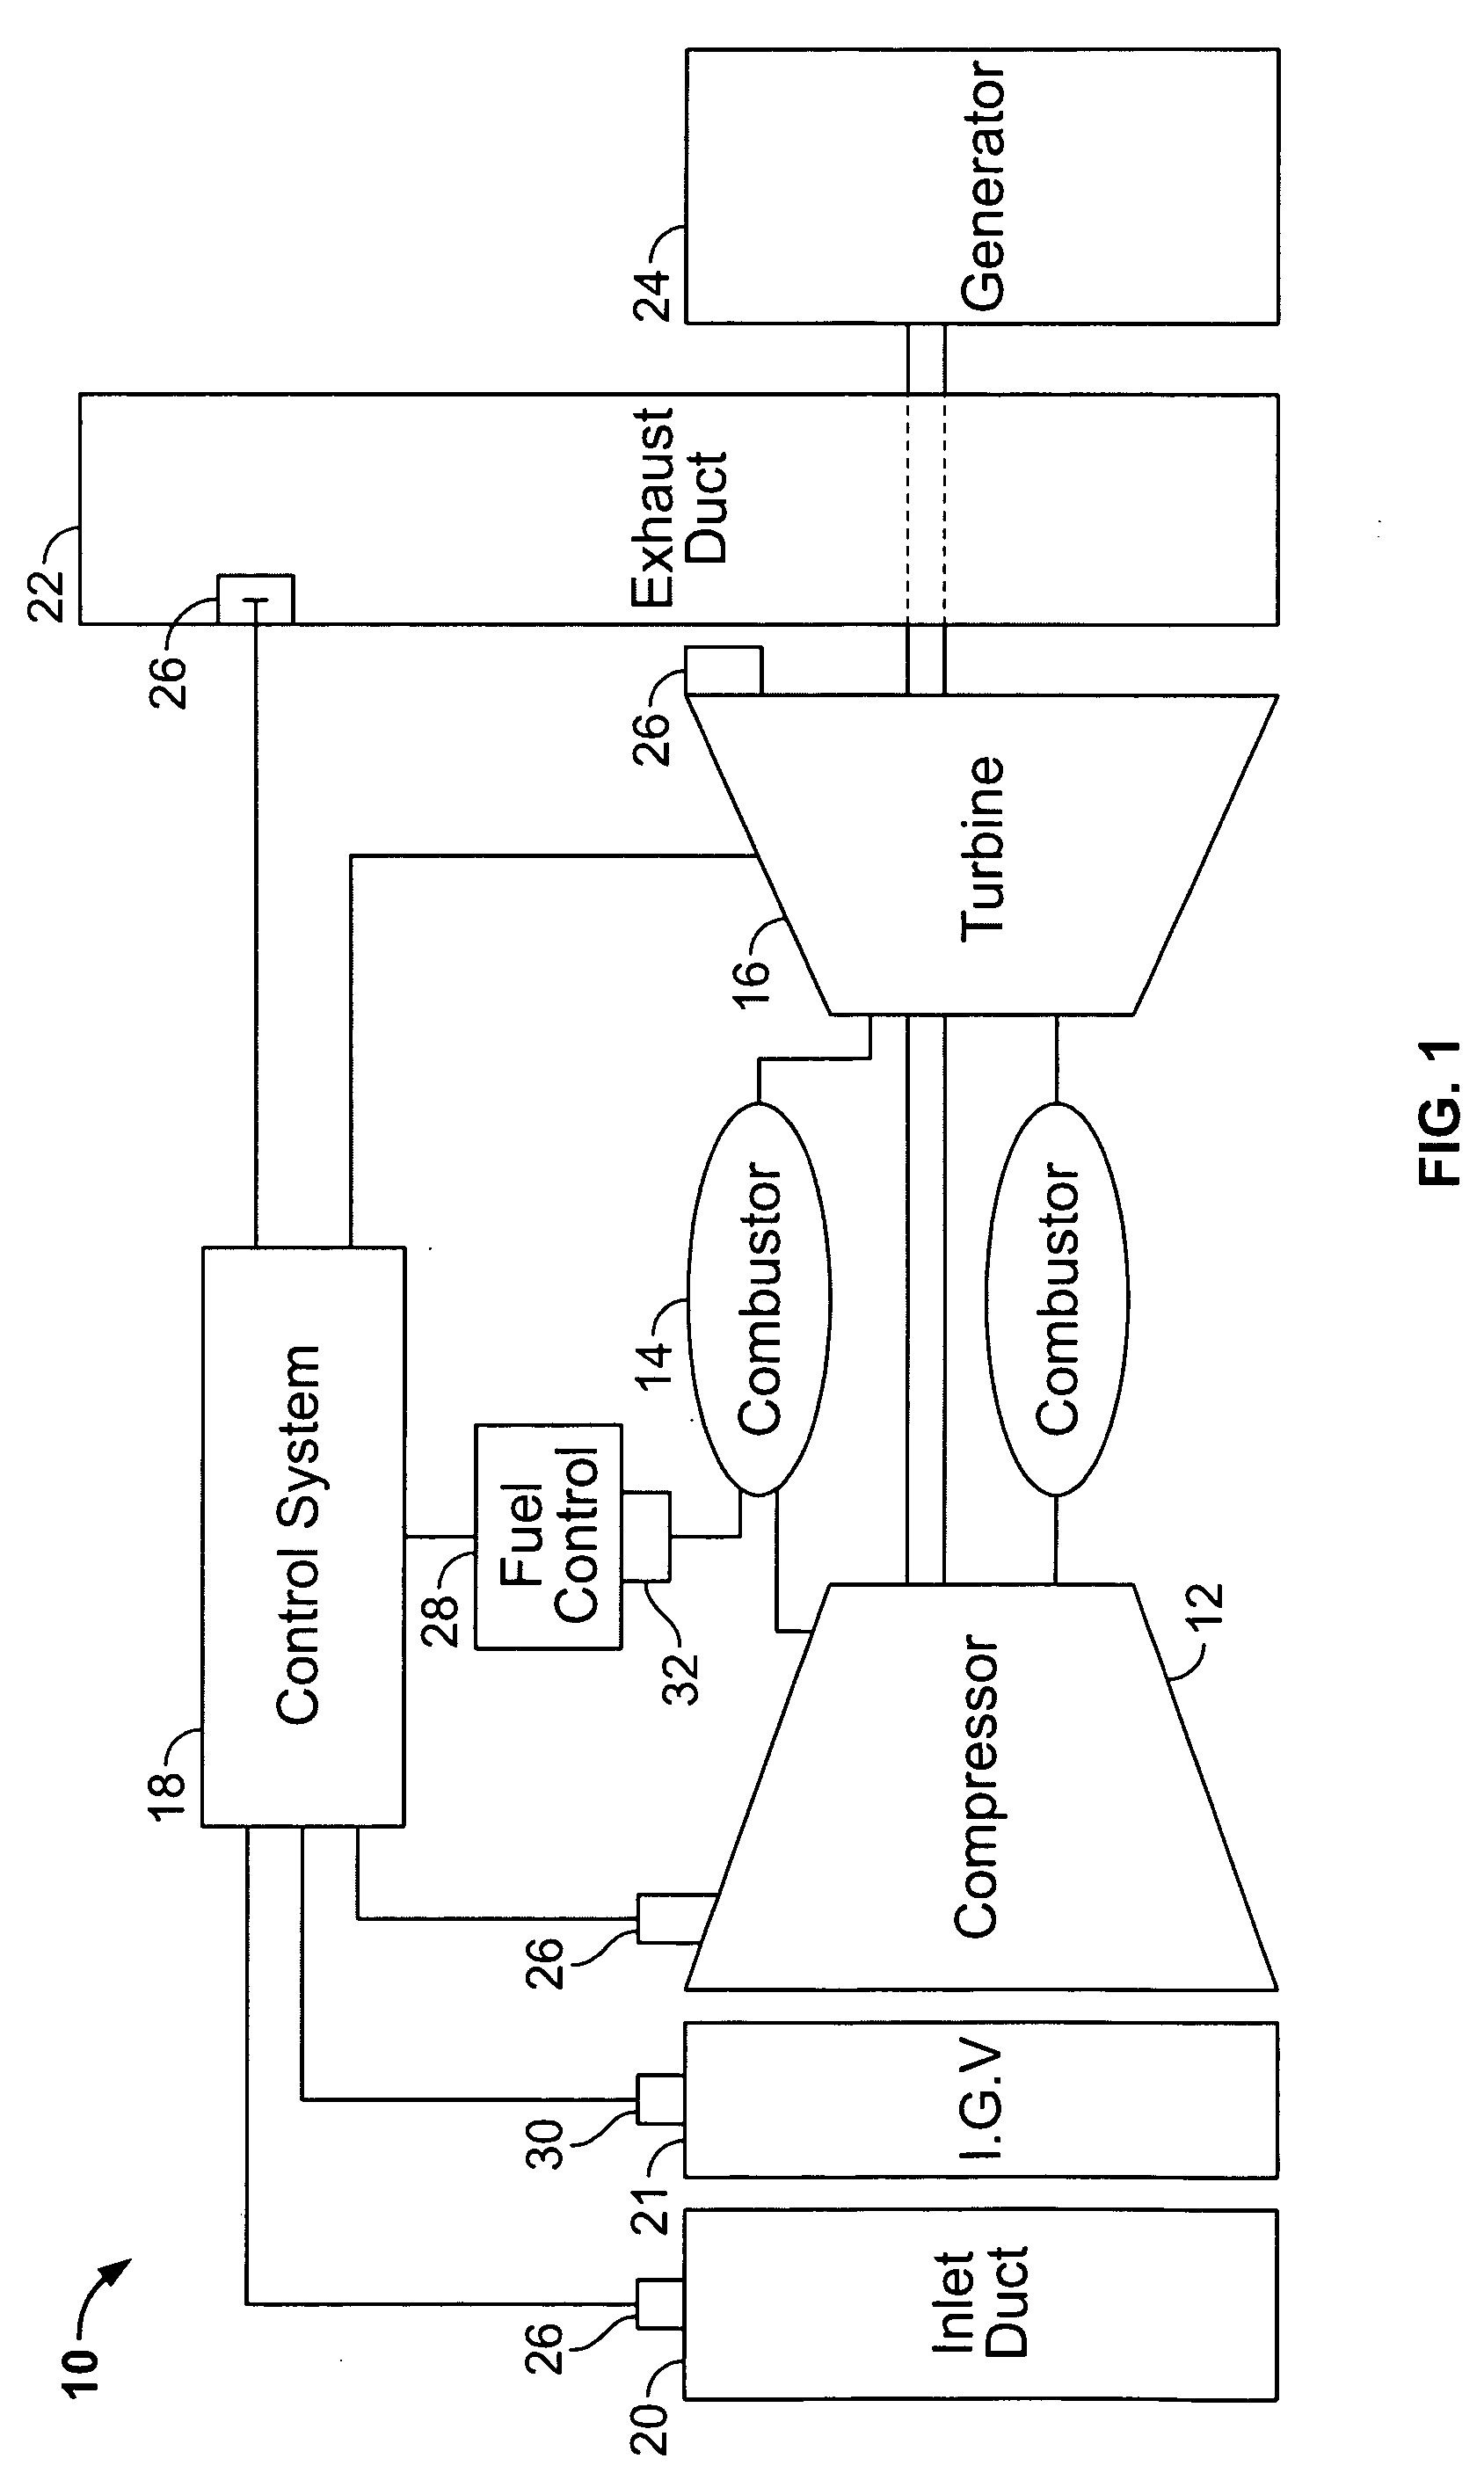 Methods and apparatus for operating gas turbine engine systems